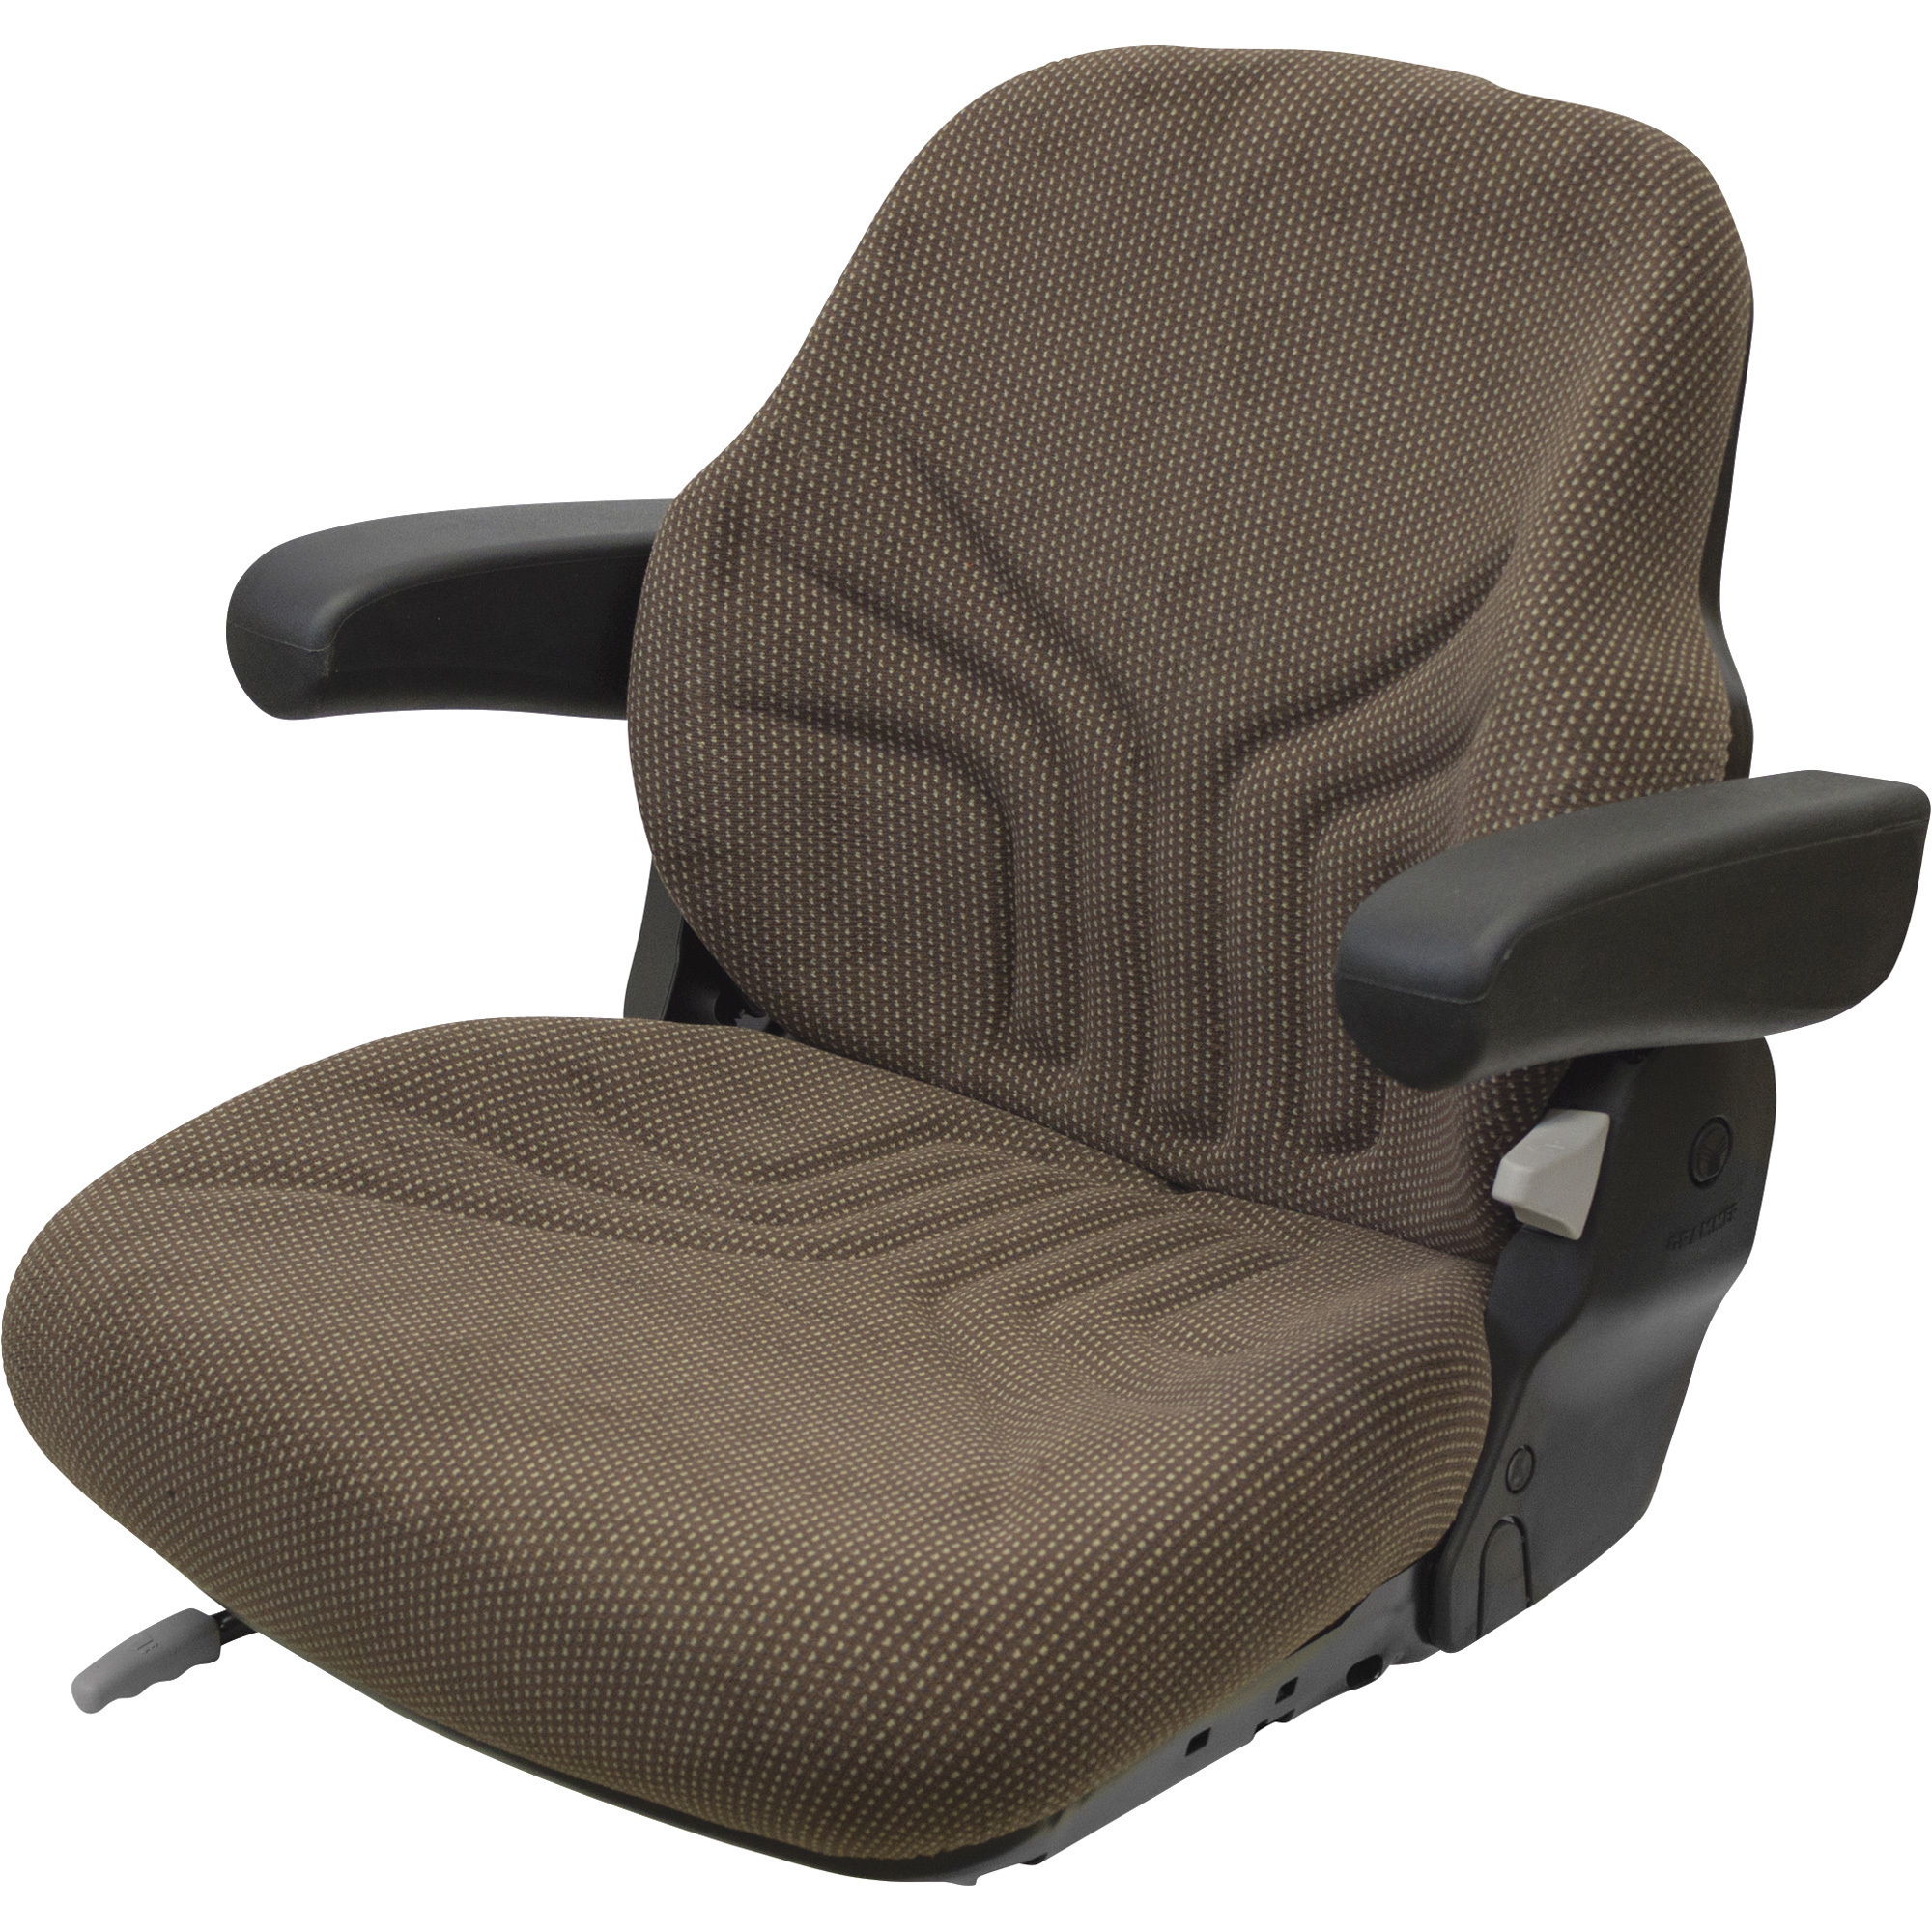 K&M Uni Pro Fabric Tractor Seat with Folding Armrests, Brown, Model 8312